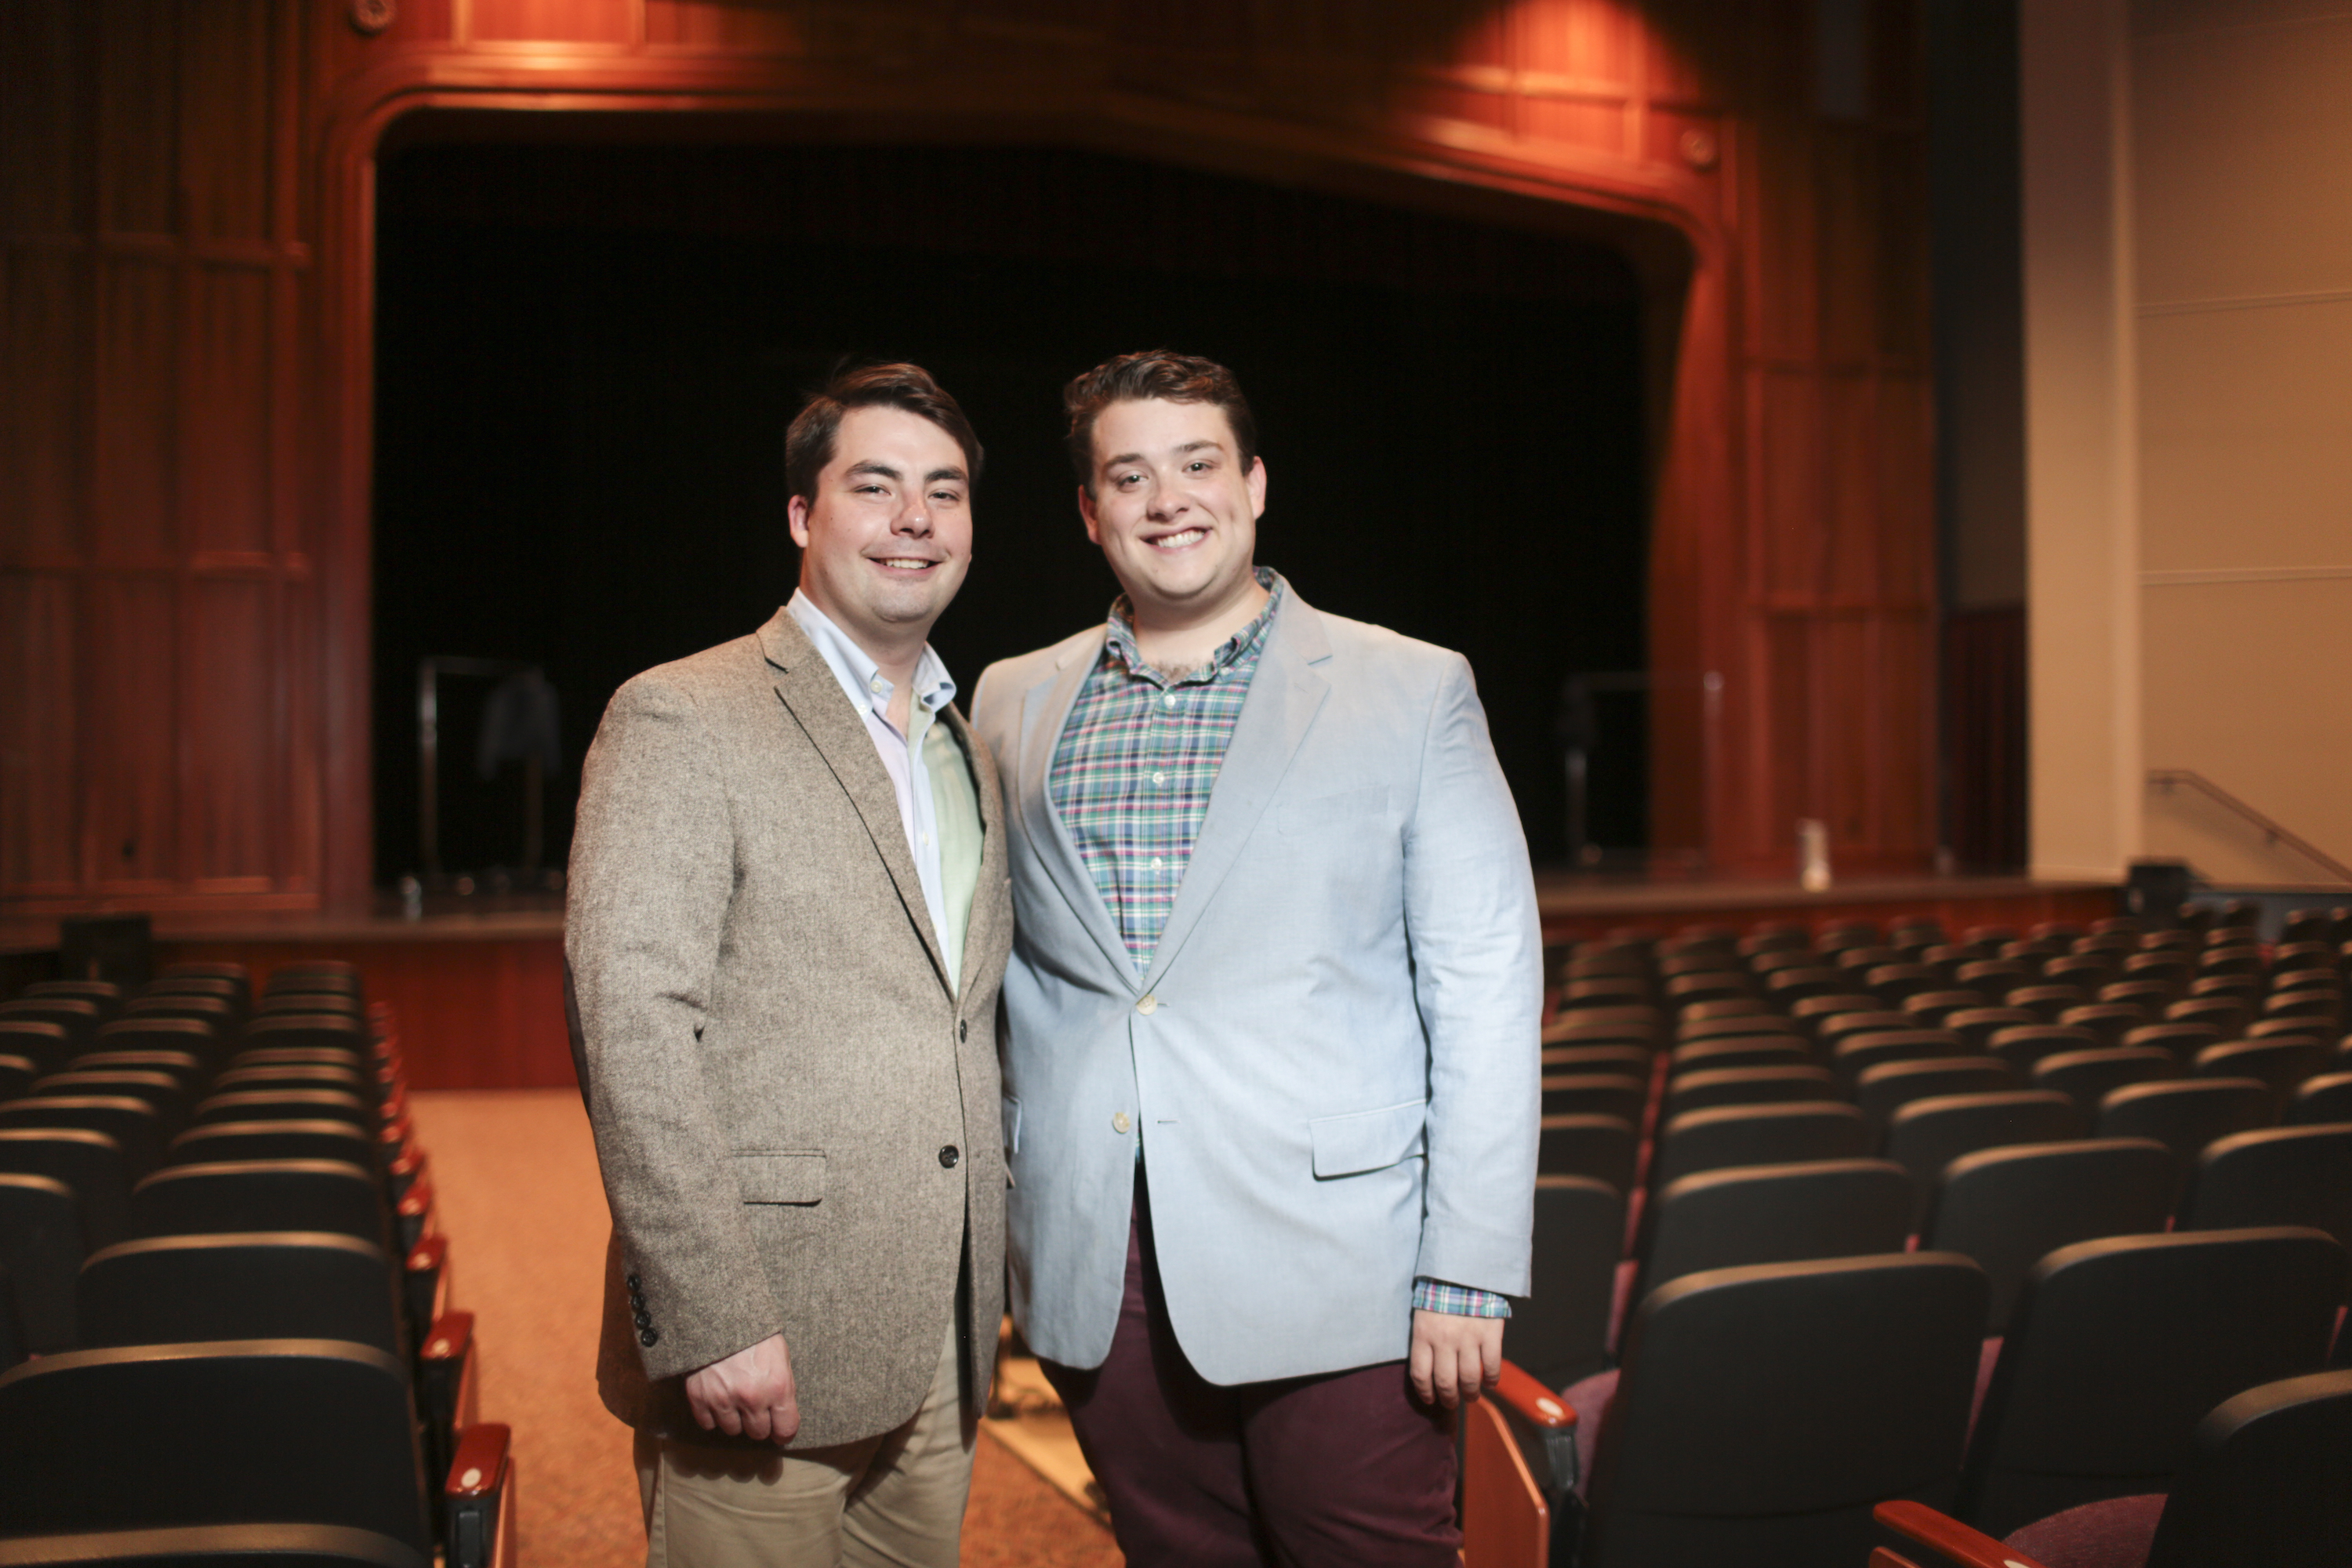 From left: University of Scranton and Scranton Preparatory School graduates Michael Flynn ’10 and Colin Holmes ’13 in Prep’s Bellarmine Theater prior to a Scranton Shakespeare Festival performance of “Measure for Measure.” The University and Prep partnered to provide housing and rehearsal and performance space for the Scranton Shakespeare Festival, providing a present-day example of the Jesuit tradition of support of the arts.